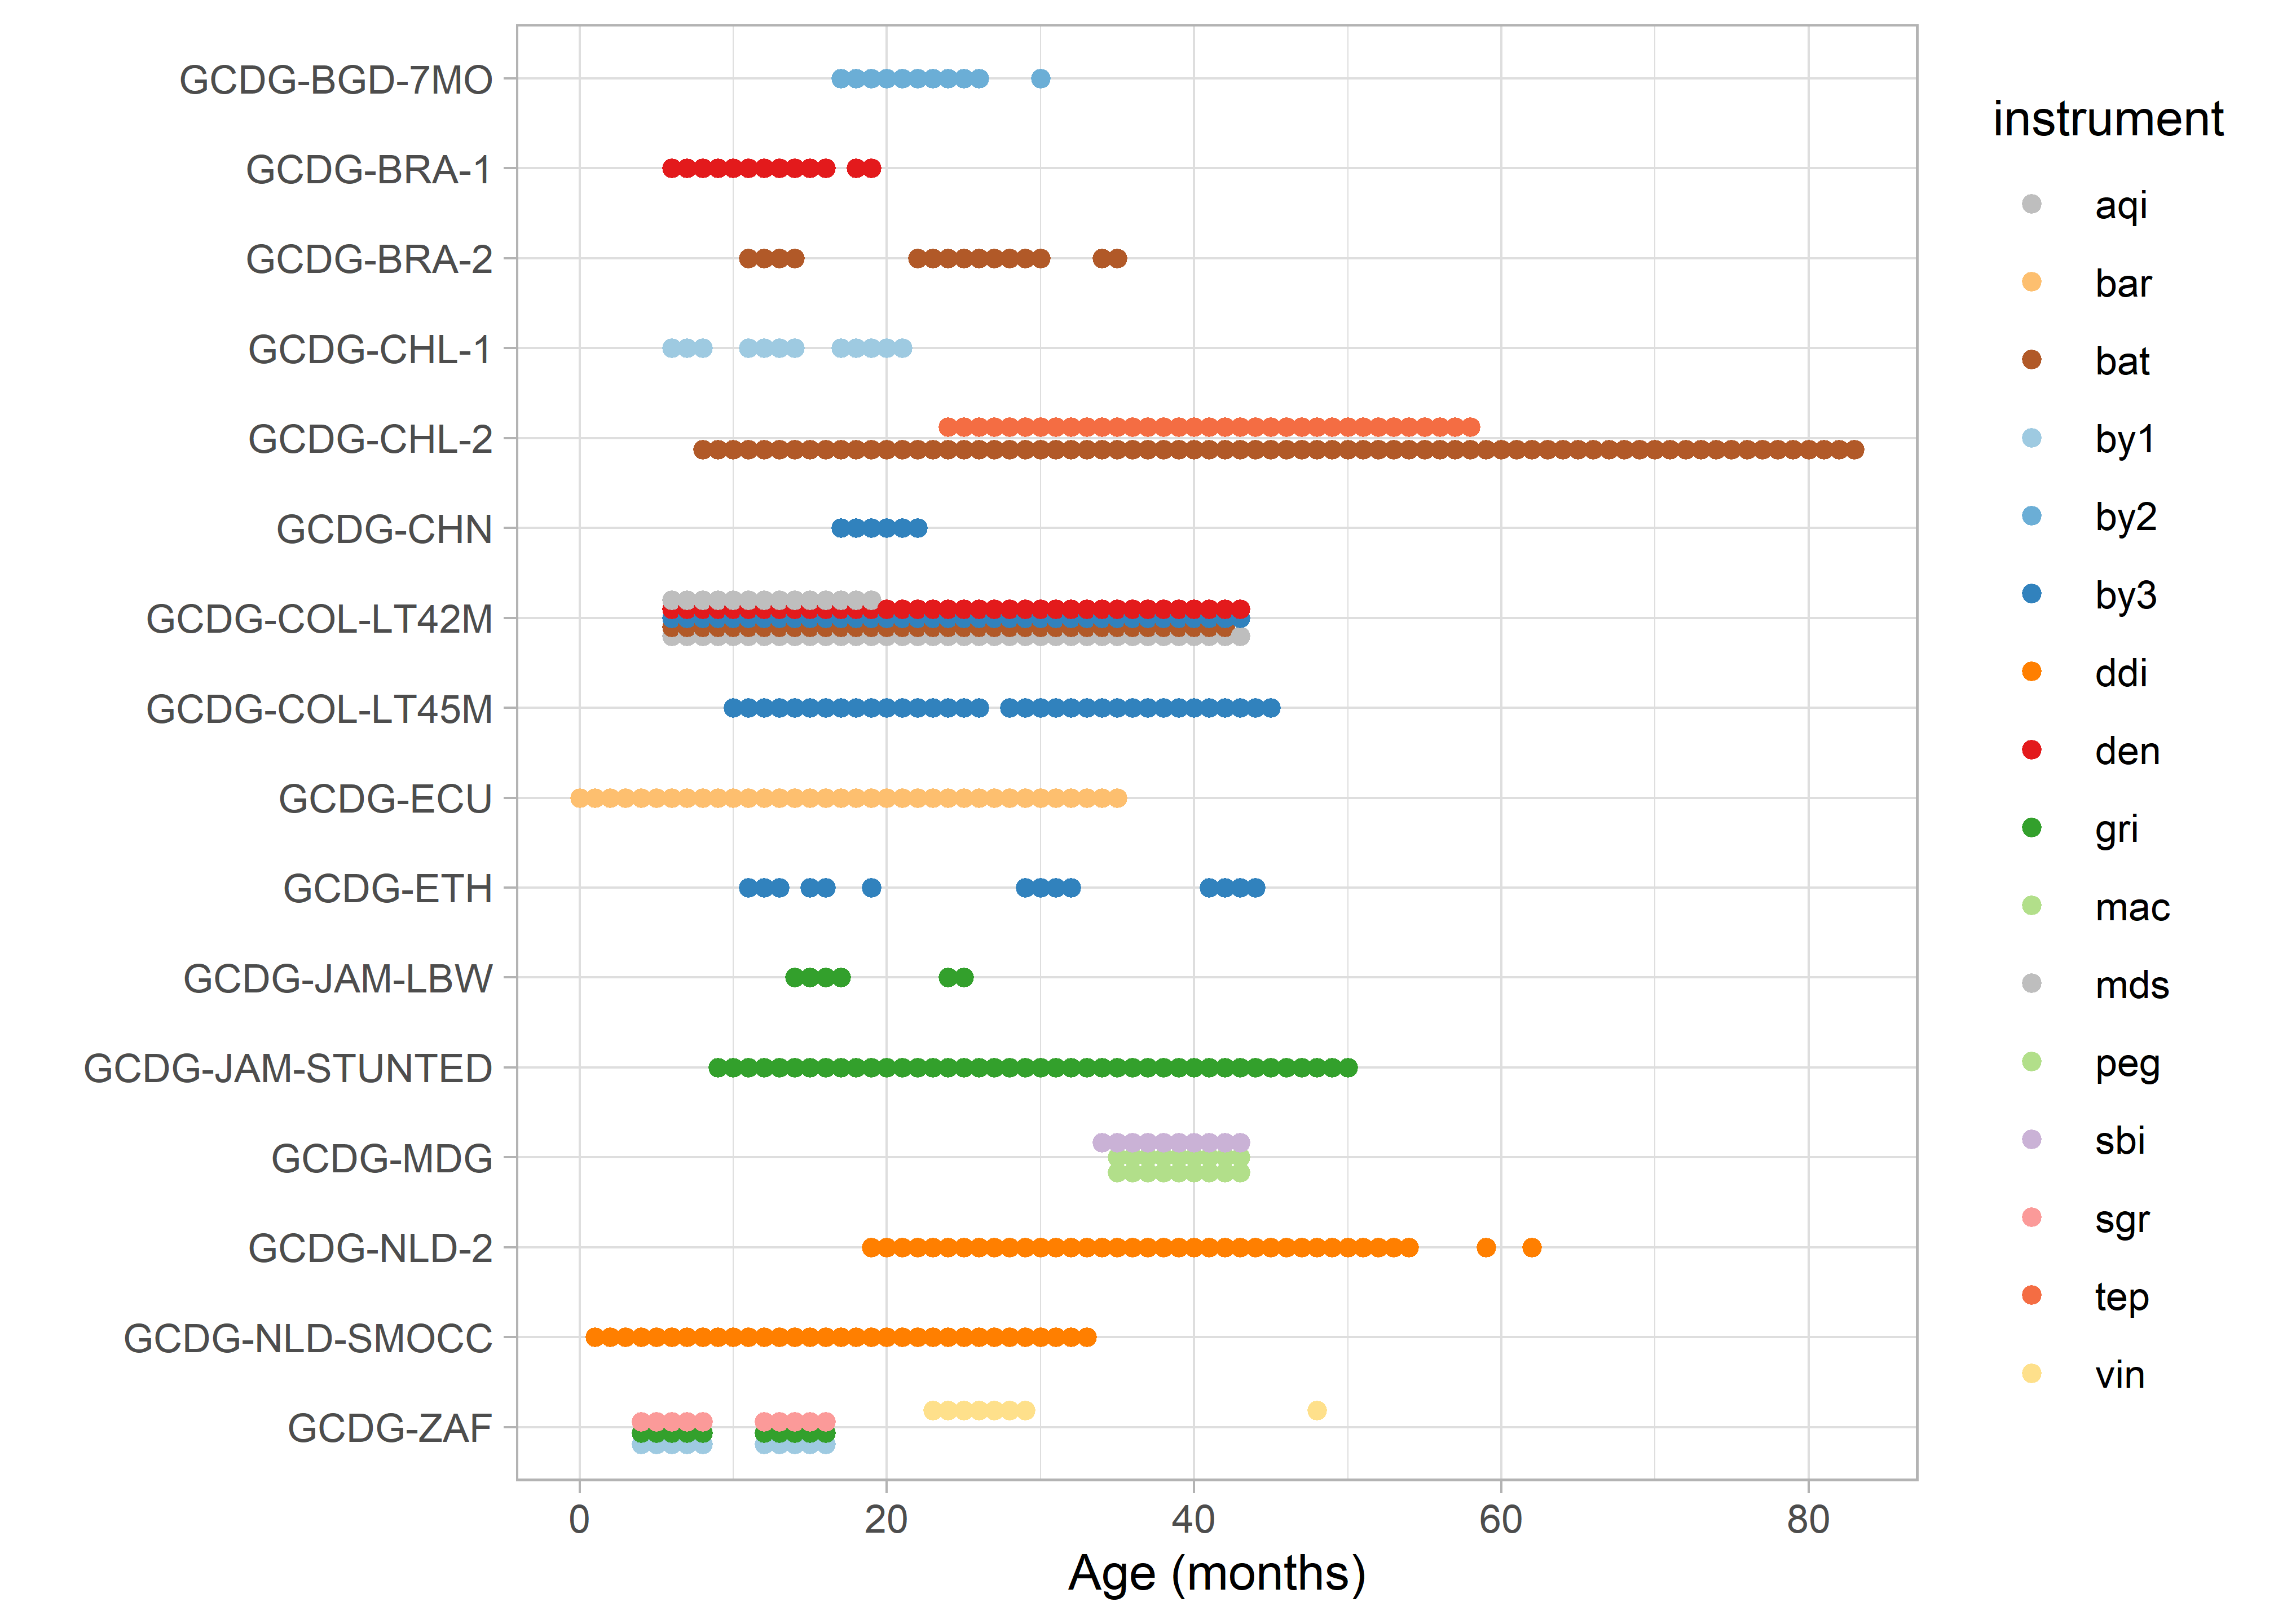 Age range and assessment instrument of included data for each GCDG cohort